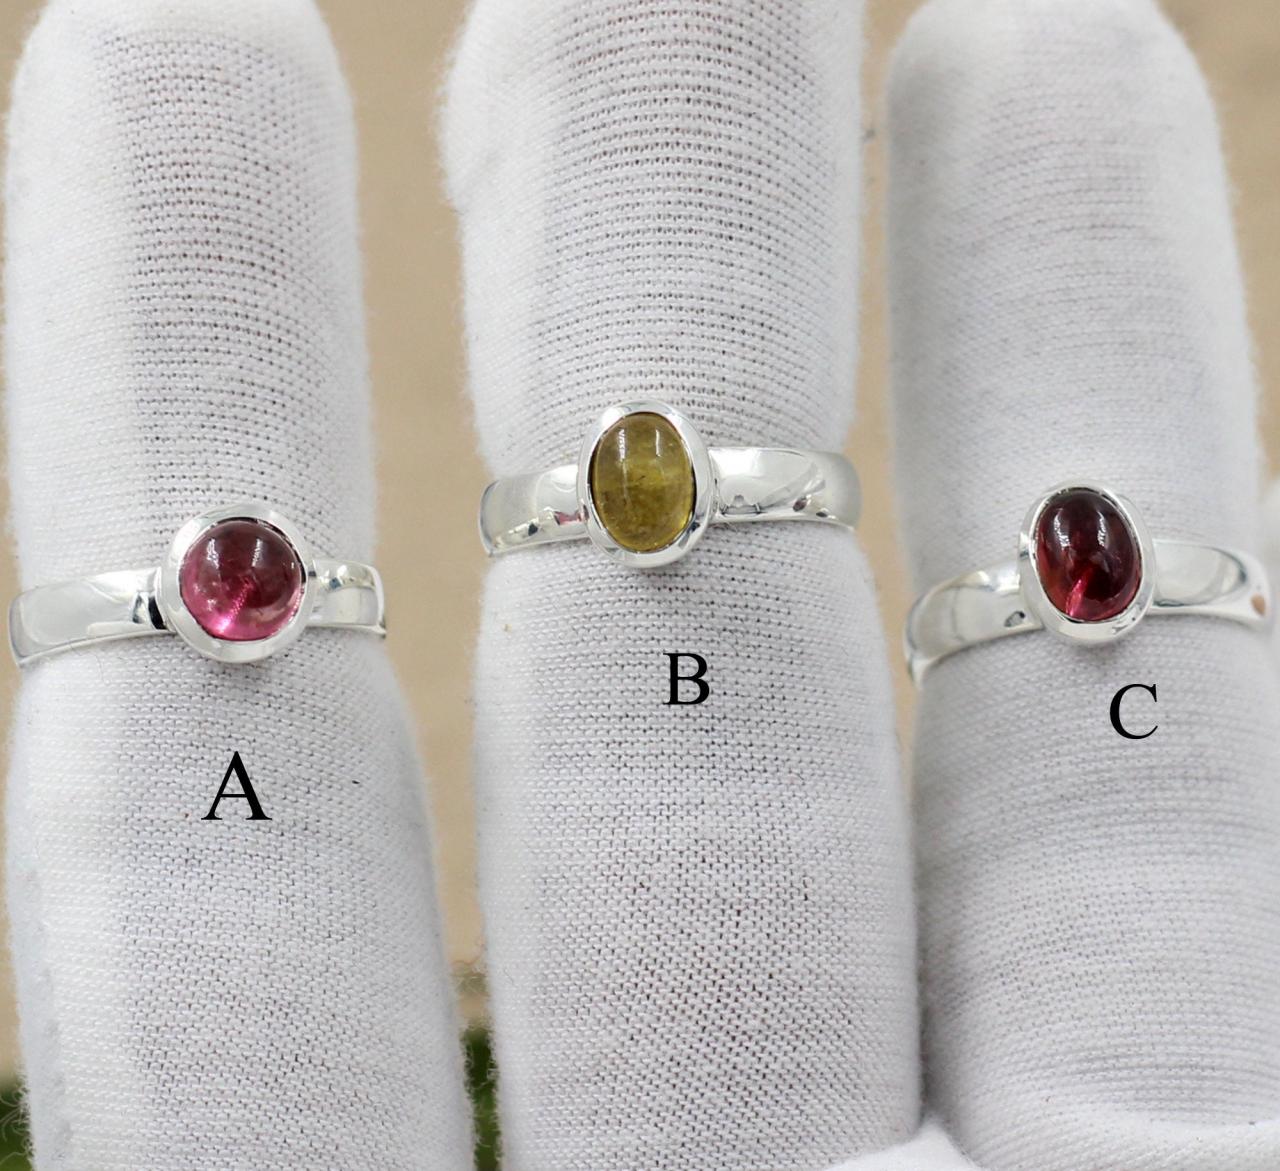 Exquisite Tourmaline Ring,stacking Handmade Ring,solid 925 Sterling Silver Gemstone Jewelry,engagement Solitaire Ring,valentine Ring Present